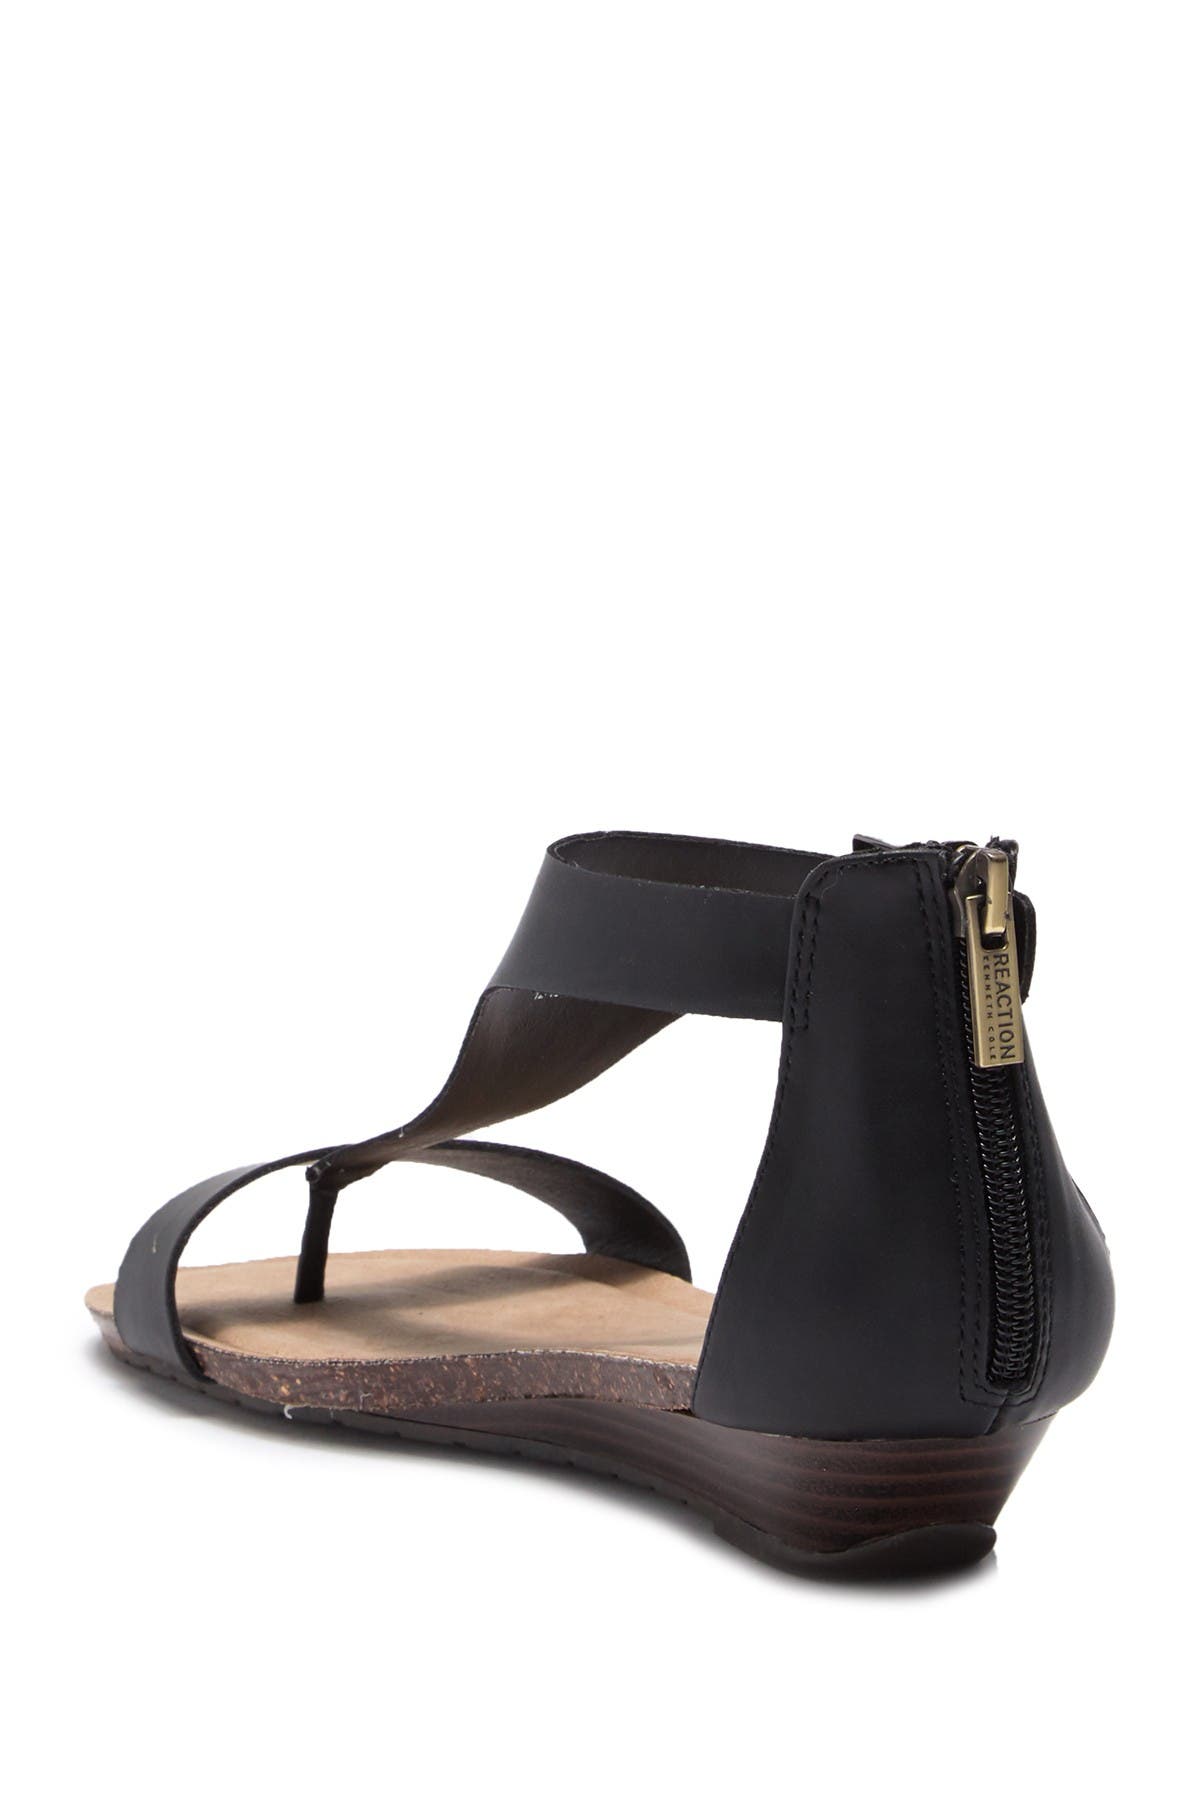 kenneth cole reaction great city wedge sandal